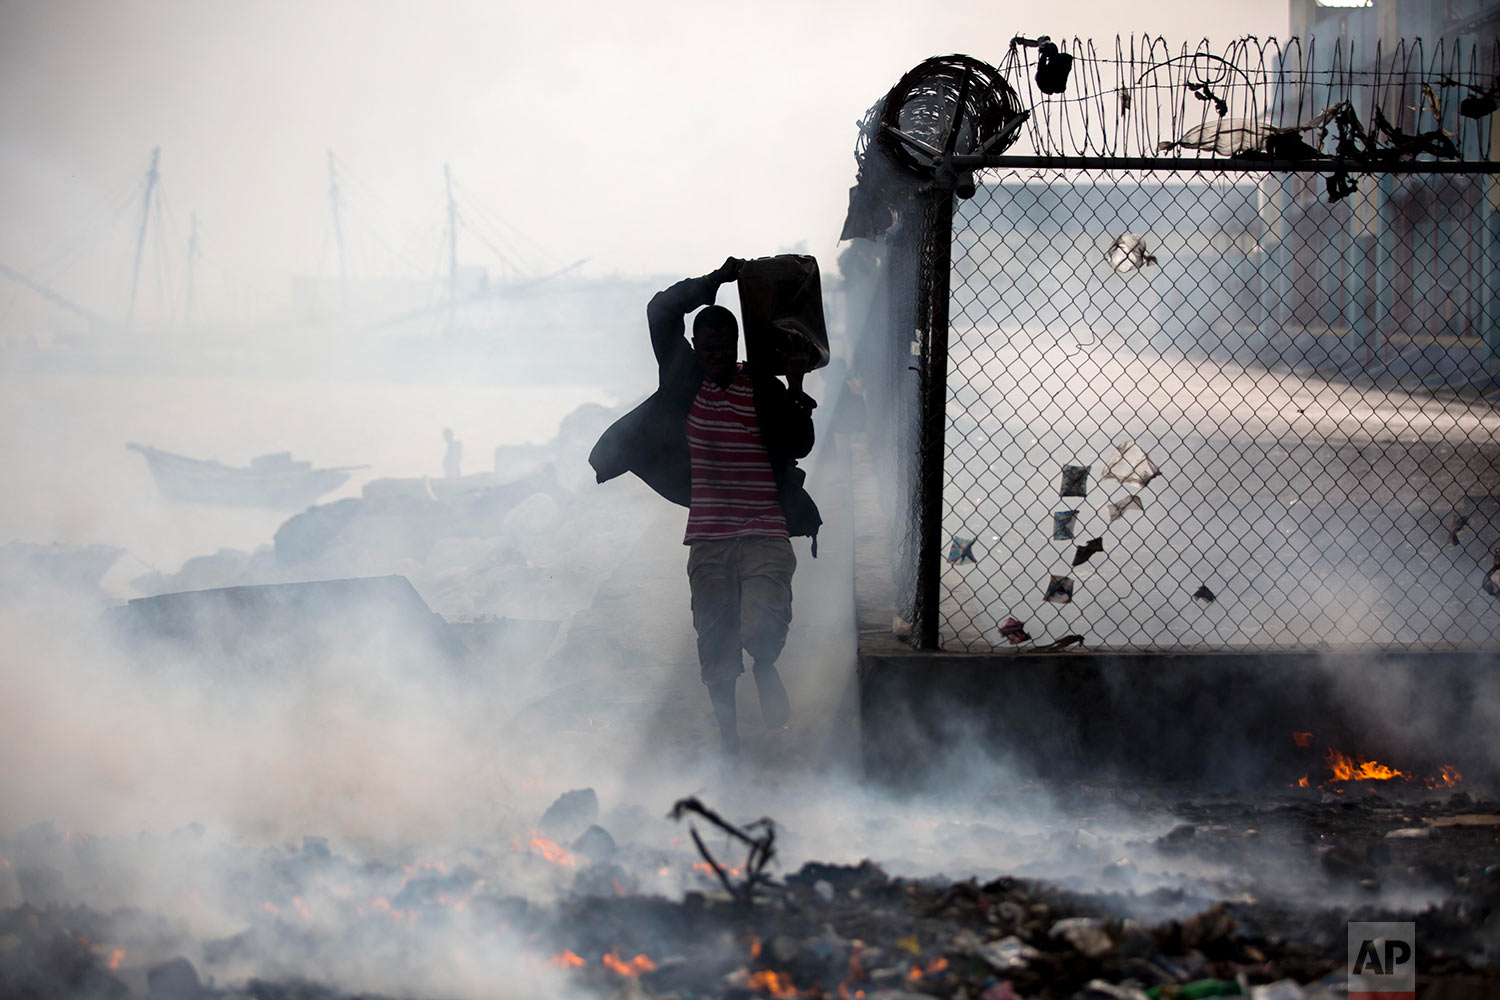  A man carries a container of sea water past burning trash at the harbor in Port-au-Prince, Haiti, June 7, 2018, to keep the fire from burning his merchandise. (AP Photo/Dieu Nalio Chery) 